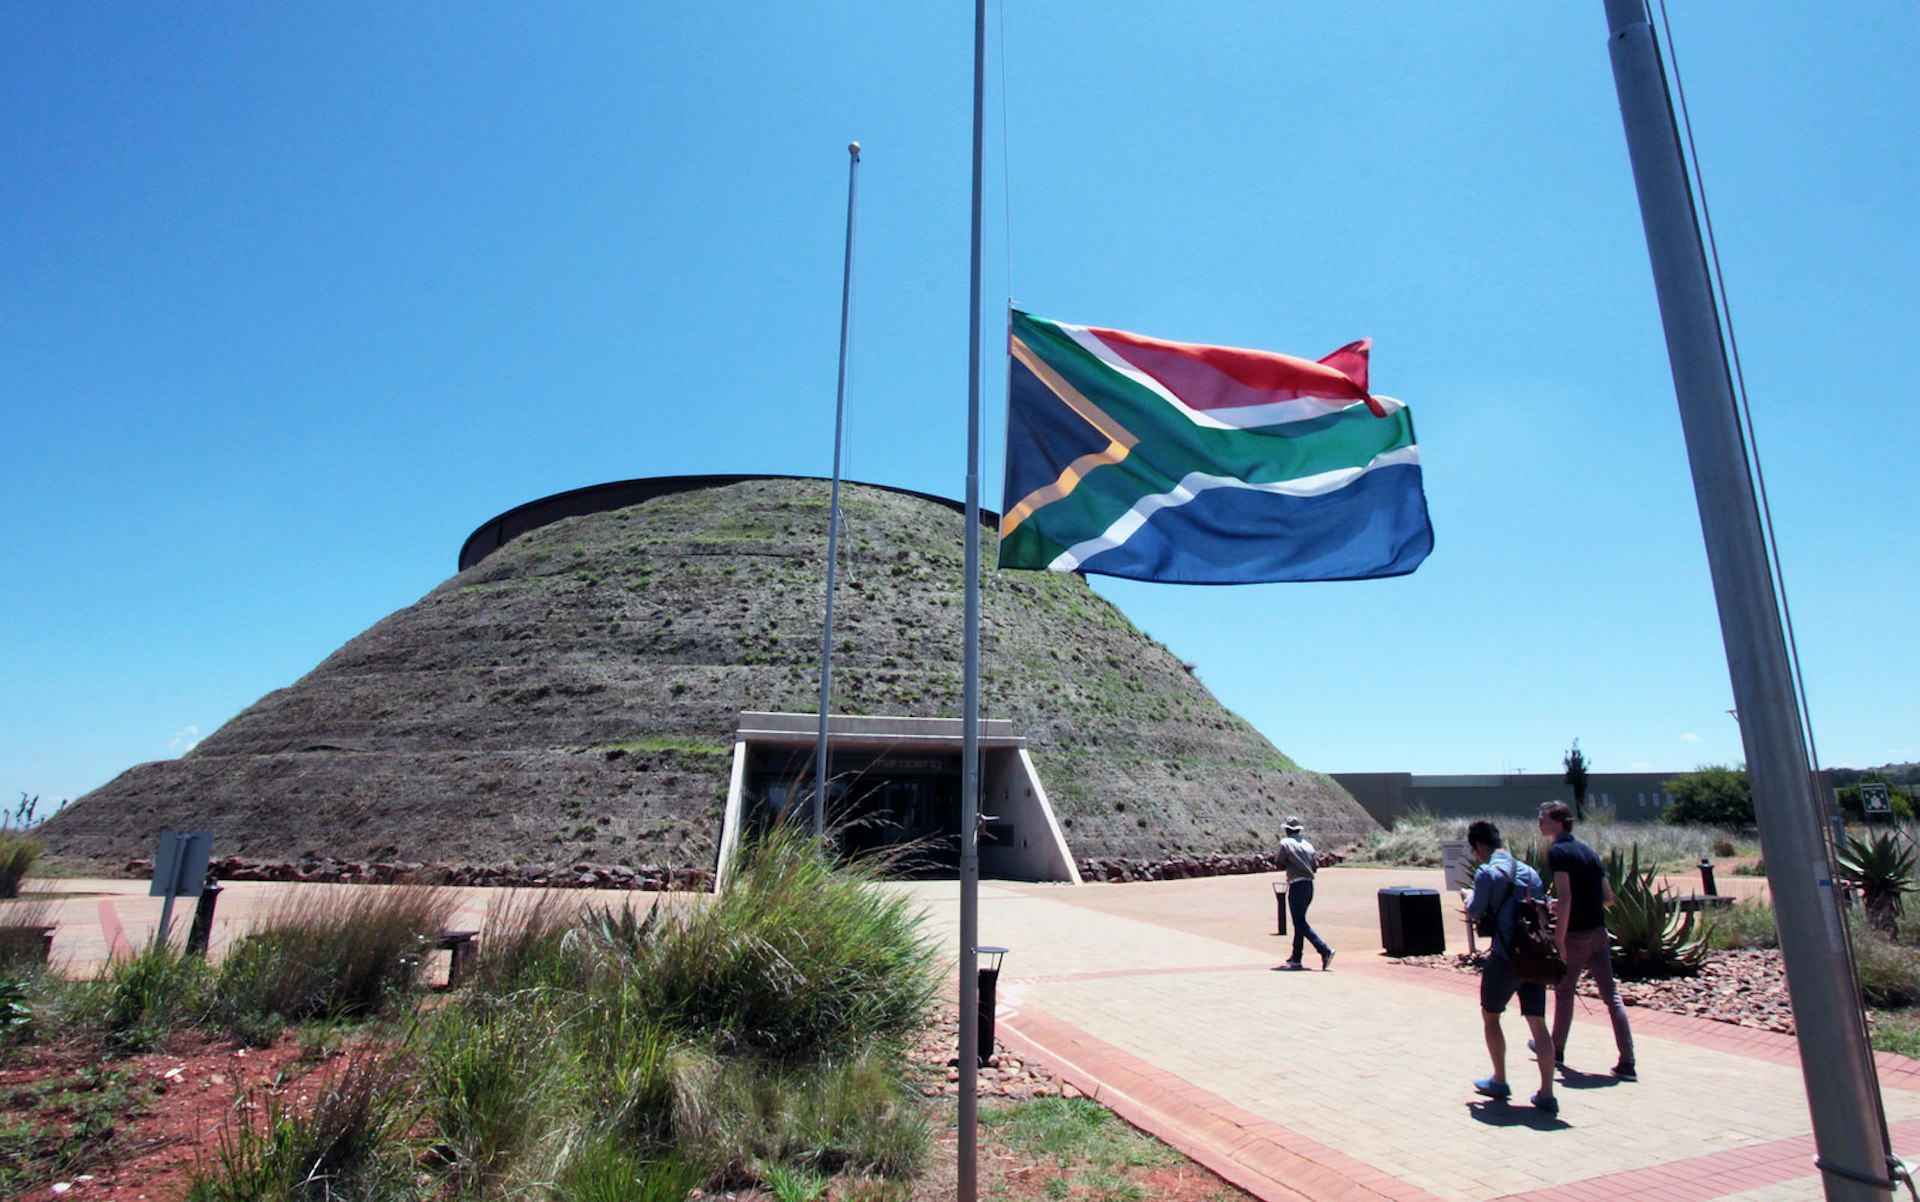 A couple of visitors walk beneath a flowing South African flag and towards a large grass-covered dome; above it all is a brilliant blue sky